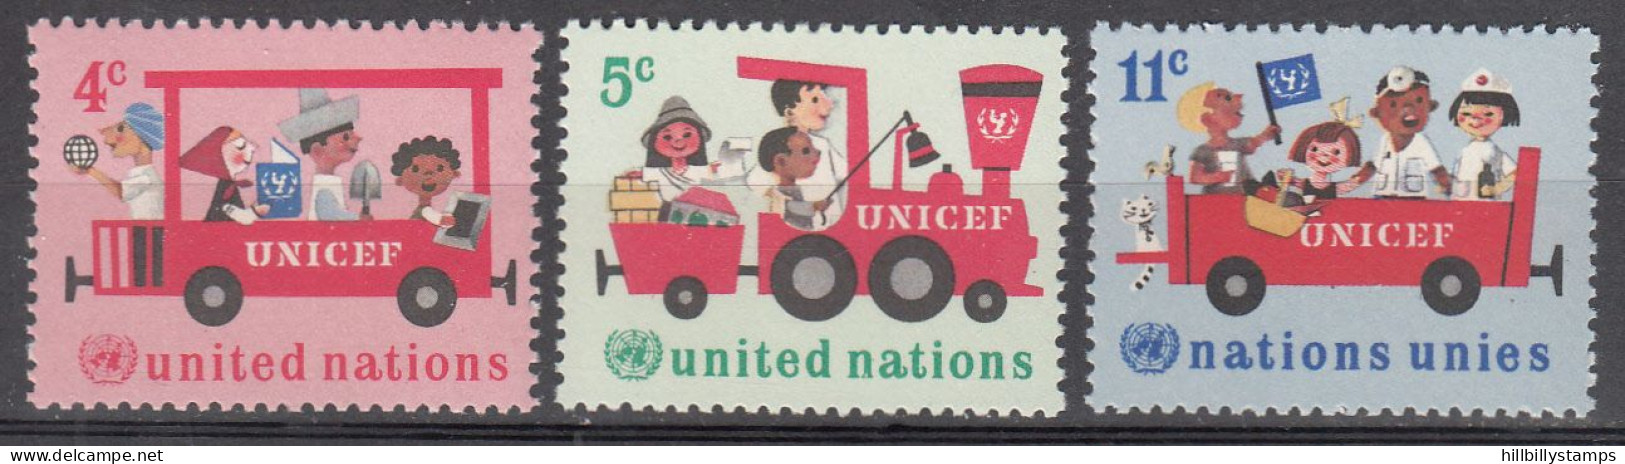 UNITED NATIONS NY   SCOTT NO 161-63   MNH     YEAR  1966 - Unused Stamps